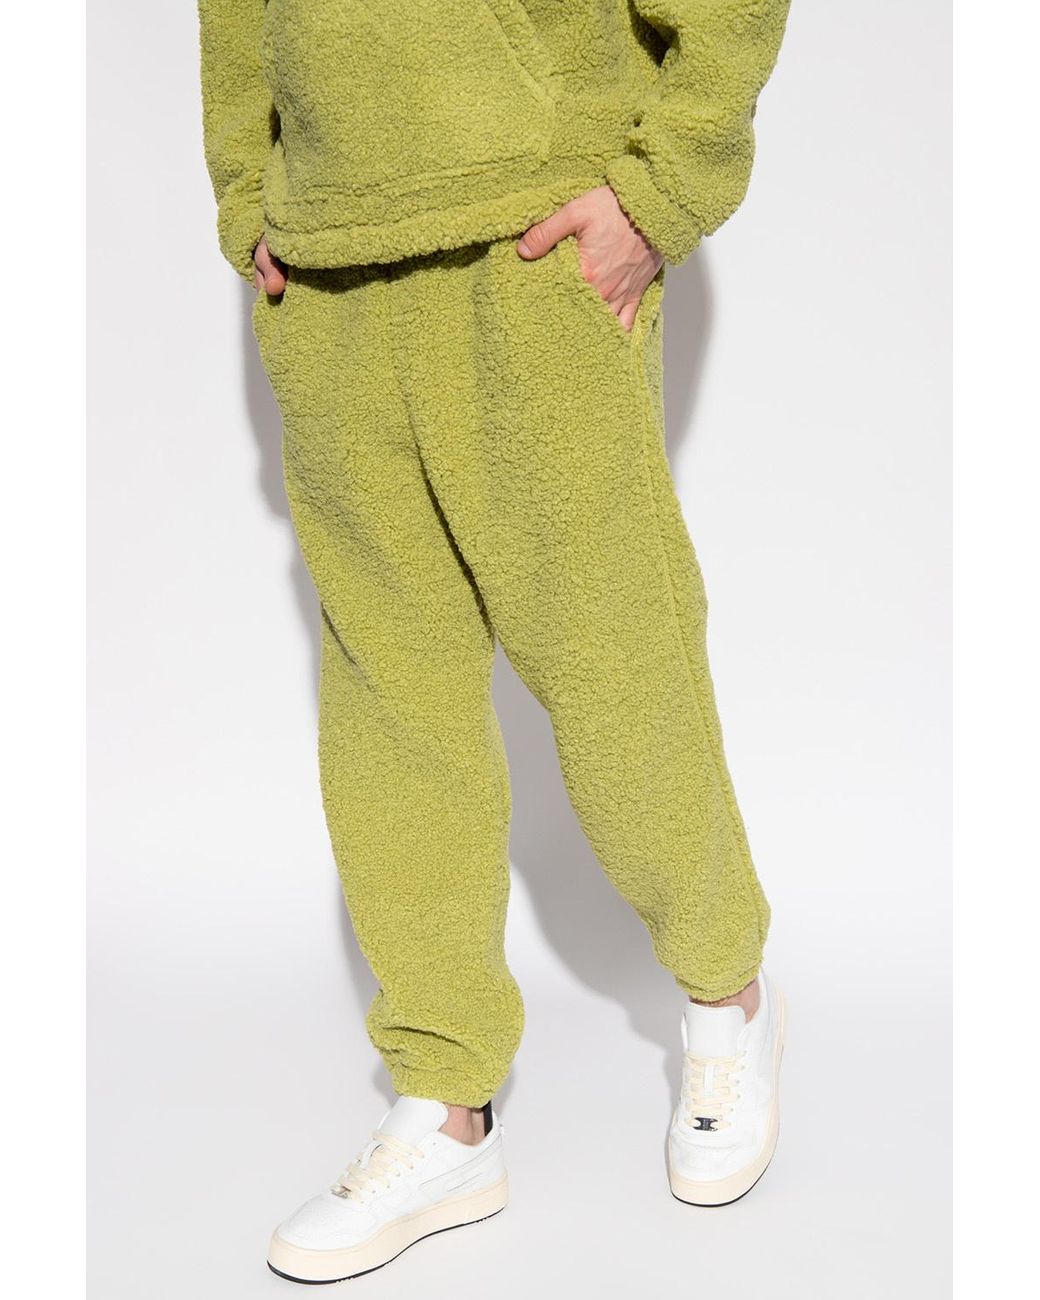 Shaggy Faux Fur Joggers Raver Neon Pants Fluffy Skiing Trousers Mountain  Fleece Overalls Festival Bottoms Burning Man Fuzzy Pants in Green 